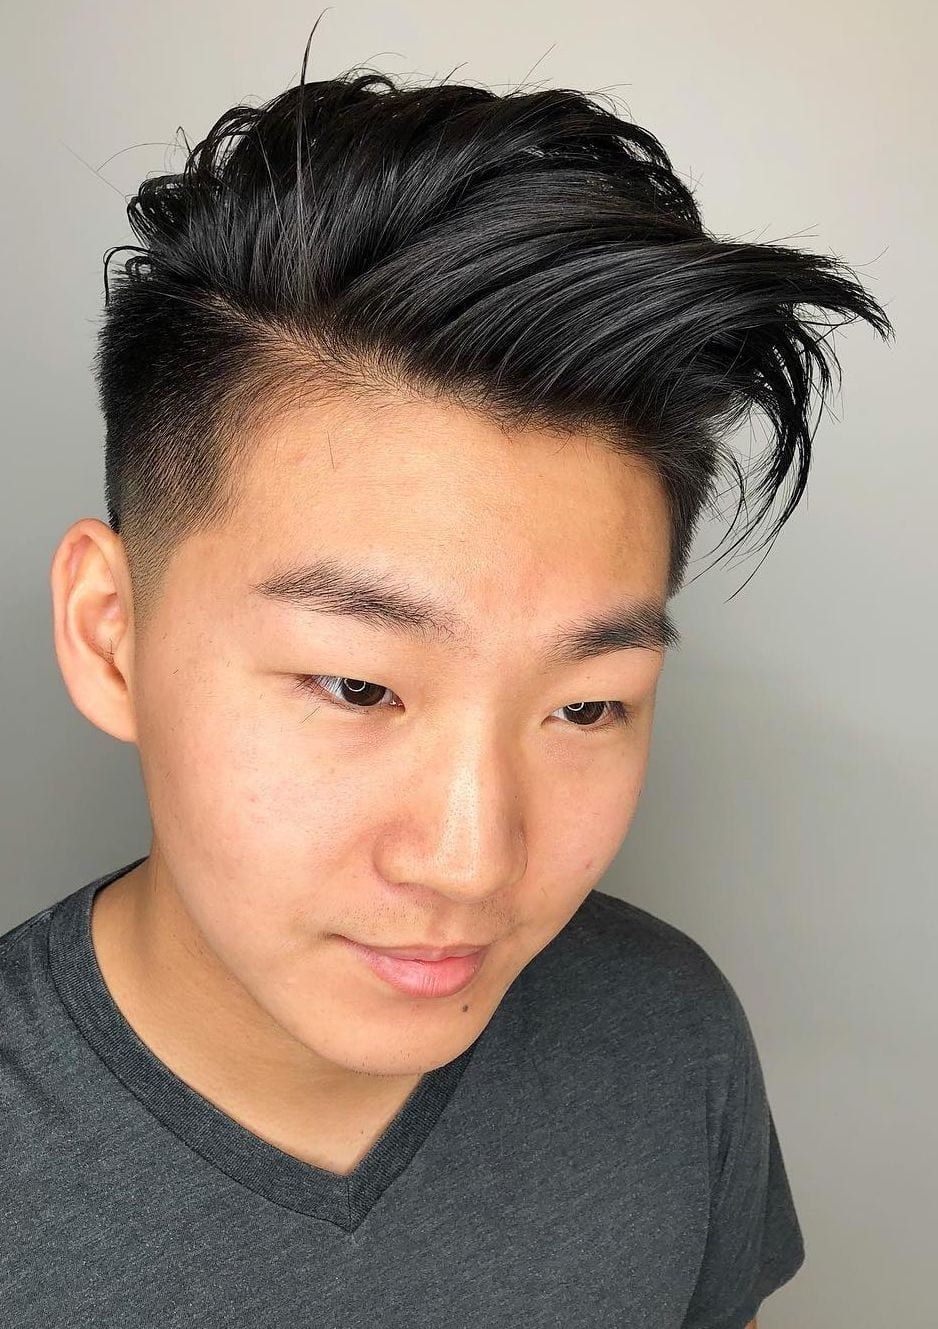 Top 30 Trendy Asian Men Hairstyles 2019 | Asian Men Hairstyle for Cool Hairstyles For Asian Guys